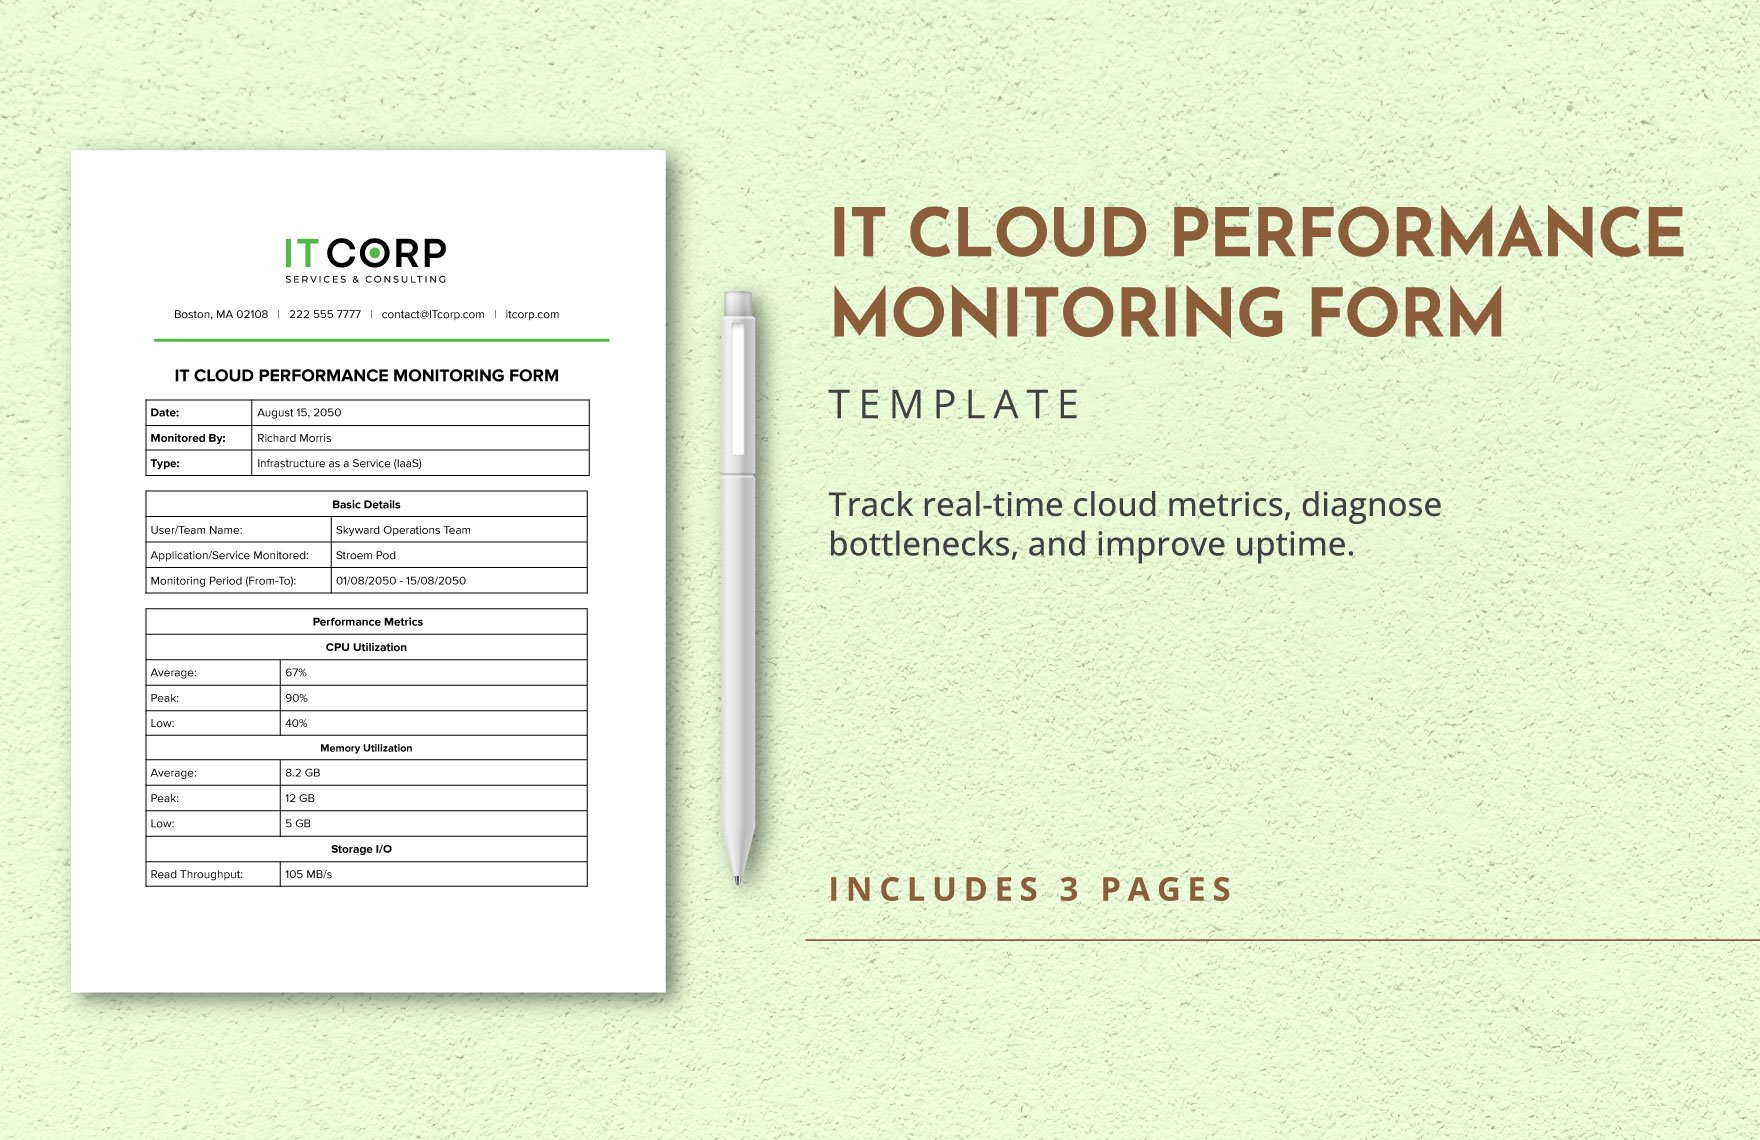 IT Cloud Performance Monitoring Form Template in Word, Google Docs, PDF